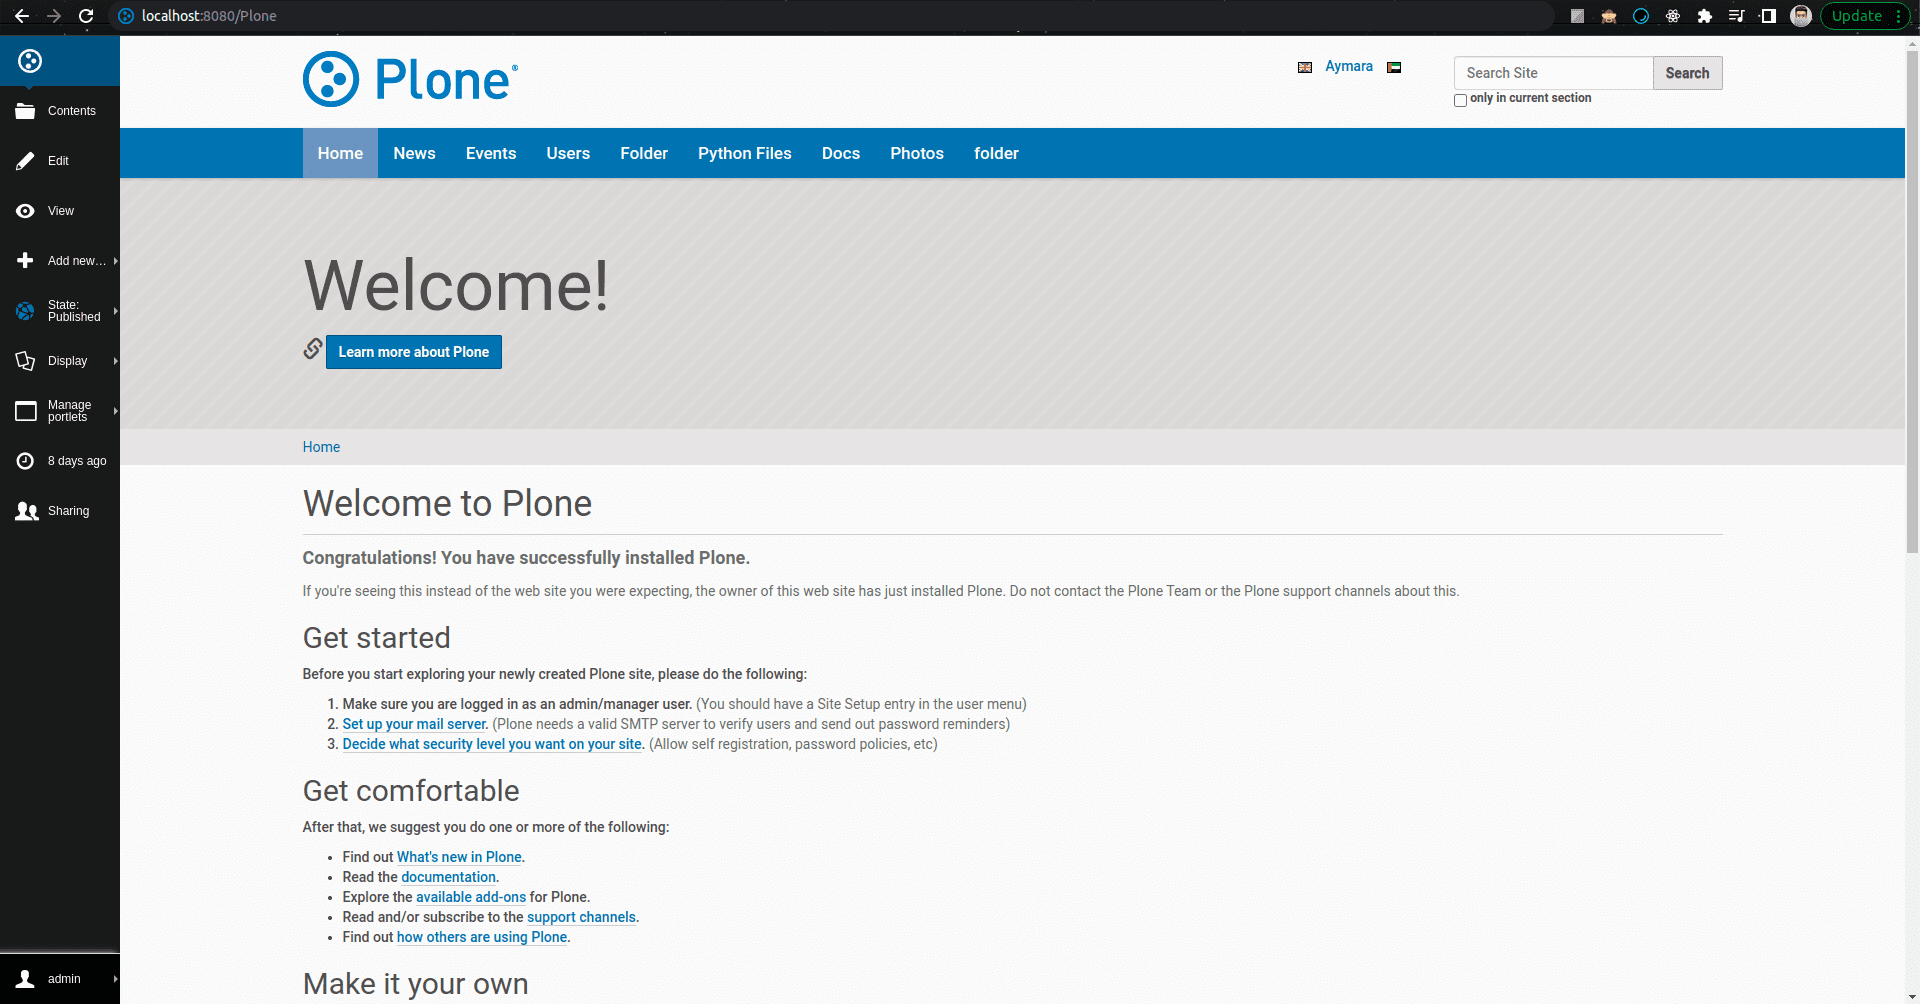 how-to-install-plone-5210-in-ubuntu-22041-lts-using-unified-installer-4-cybrosys